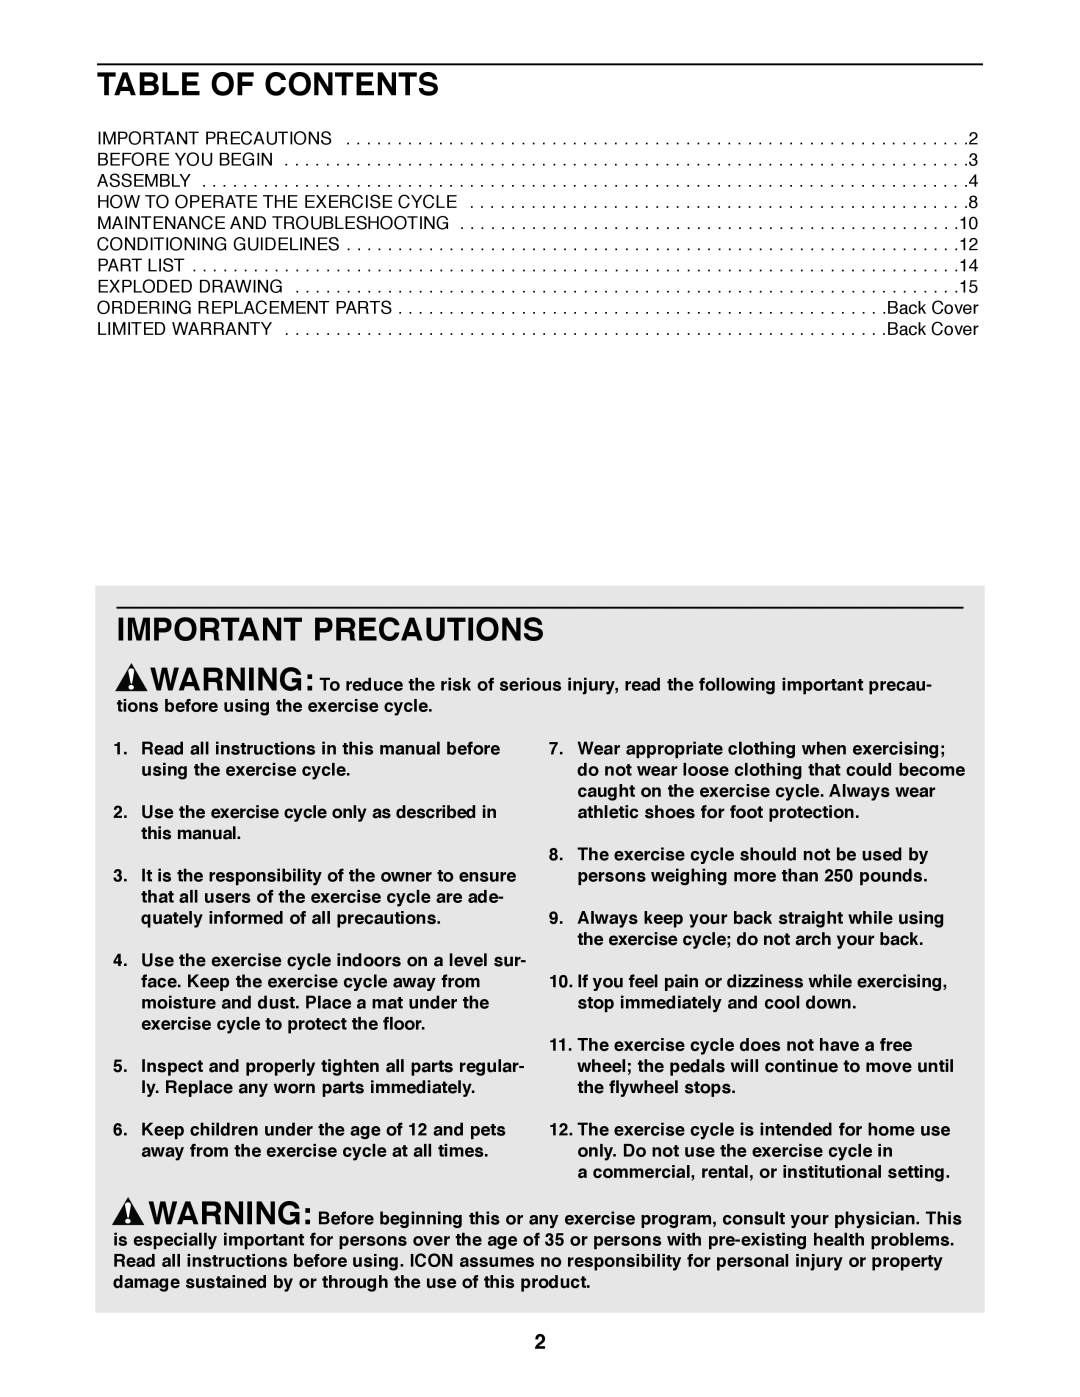 Weslo WLEX14820 Table Of Contents, Important Precautions, Use the exercise cycle only as described in this manual 